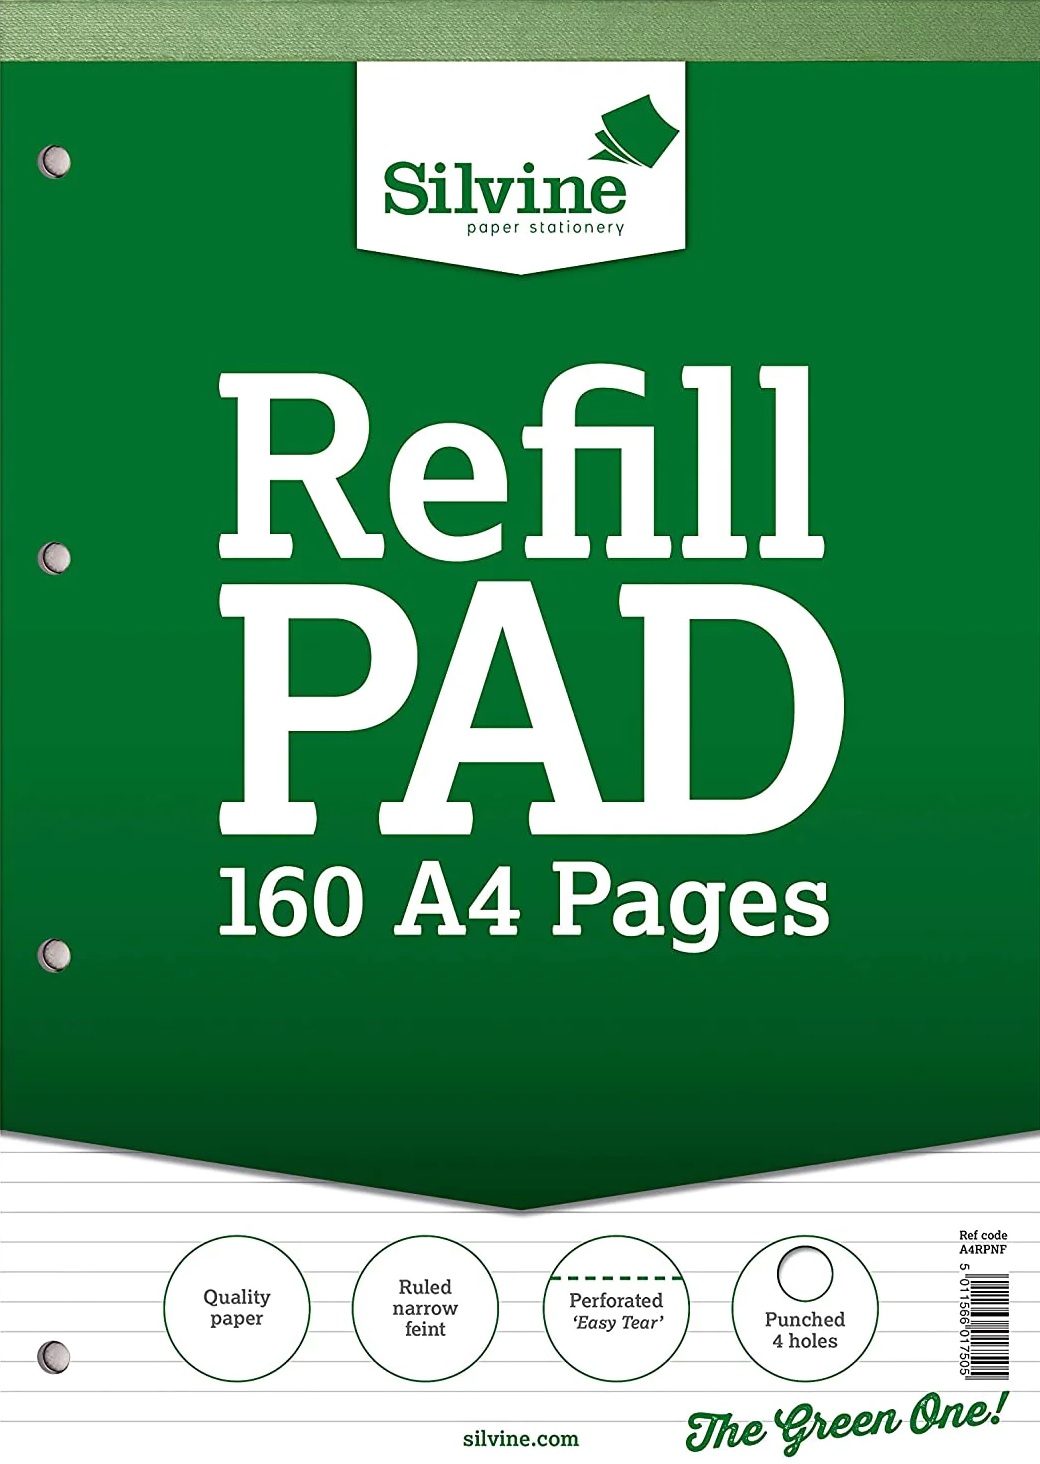 Silvine A4 Refill Pad, 160 pages, Narrow Feint  (Green cover)